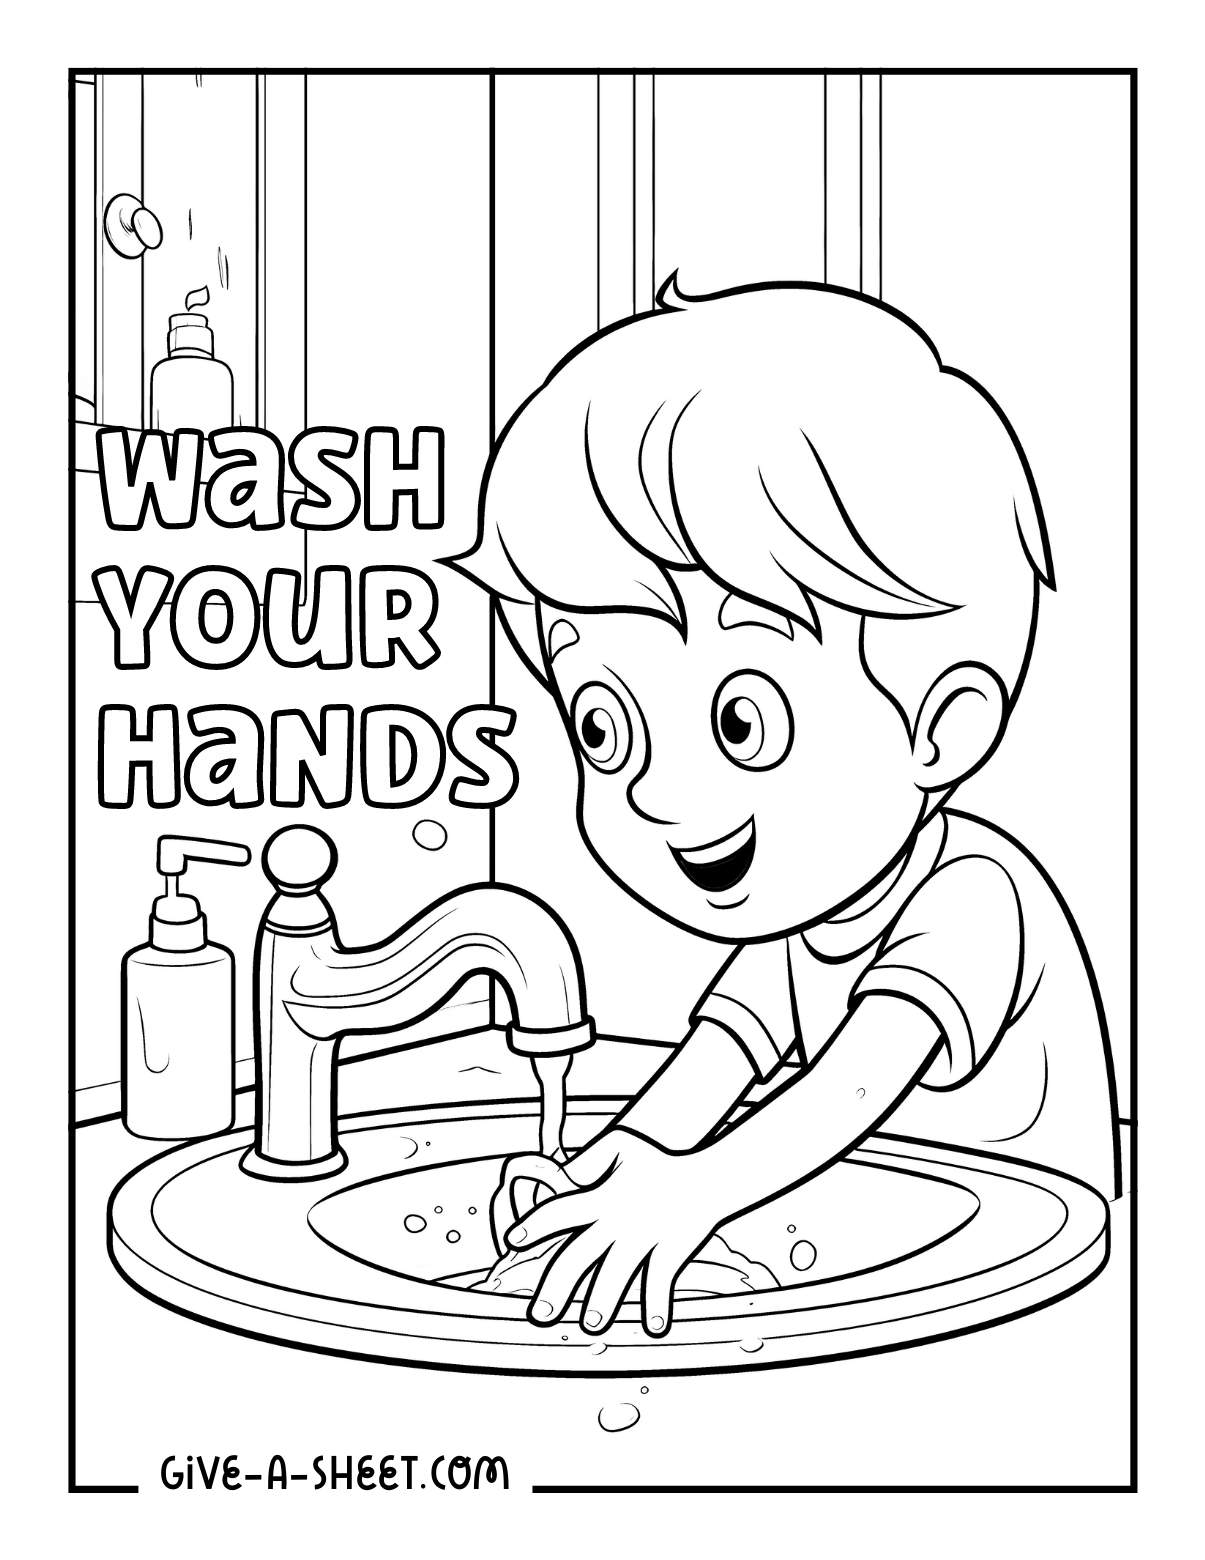 Fun way of potty training and hand washing toilet coloring sheets.